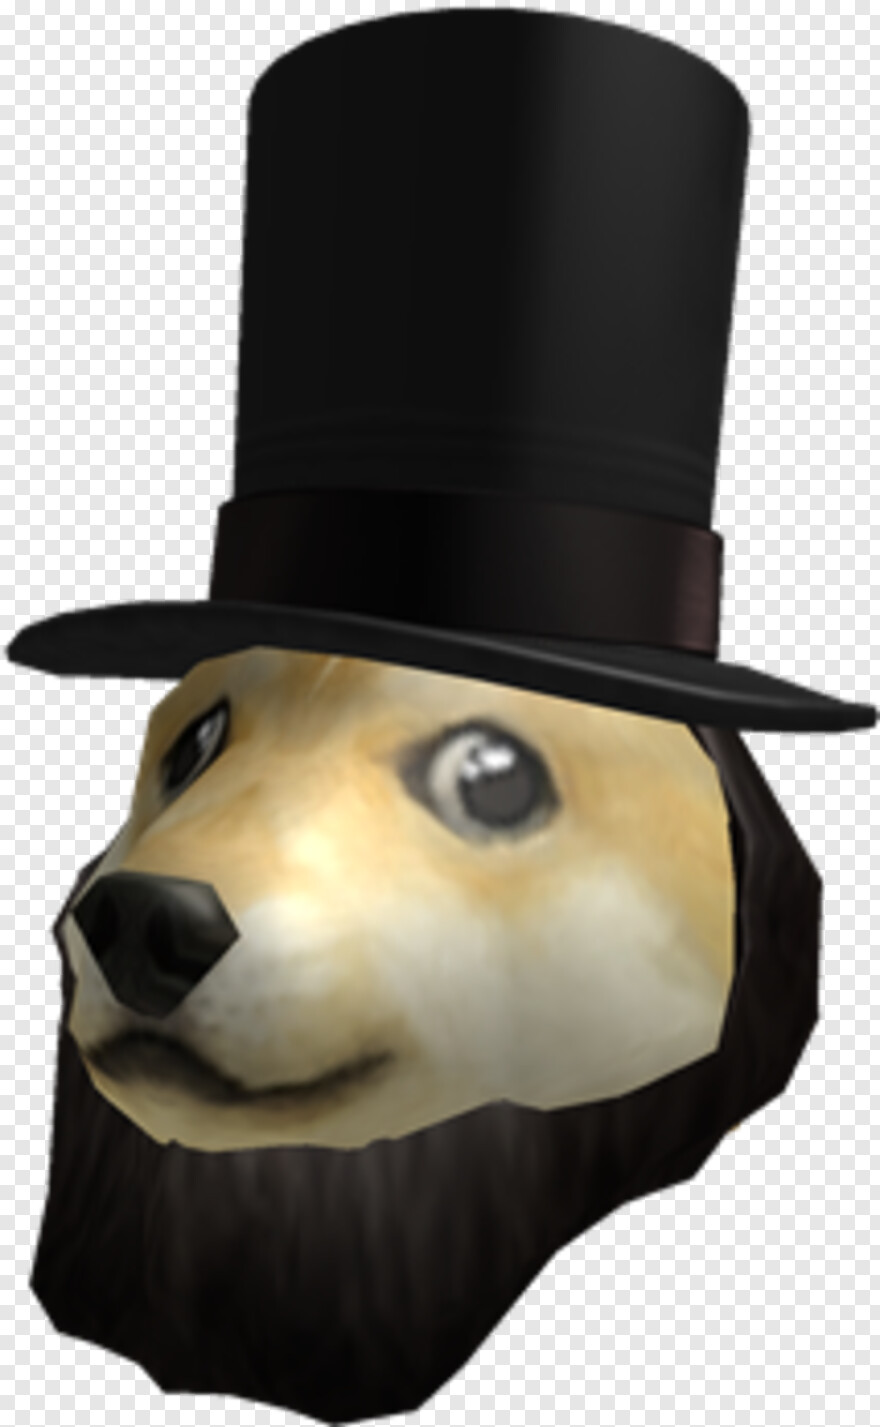 President Seal Roblox Logo Doge Roblox Jacket Doge Head Roblox Head 893934 Free Icon Library - how to get the doge head in roblox